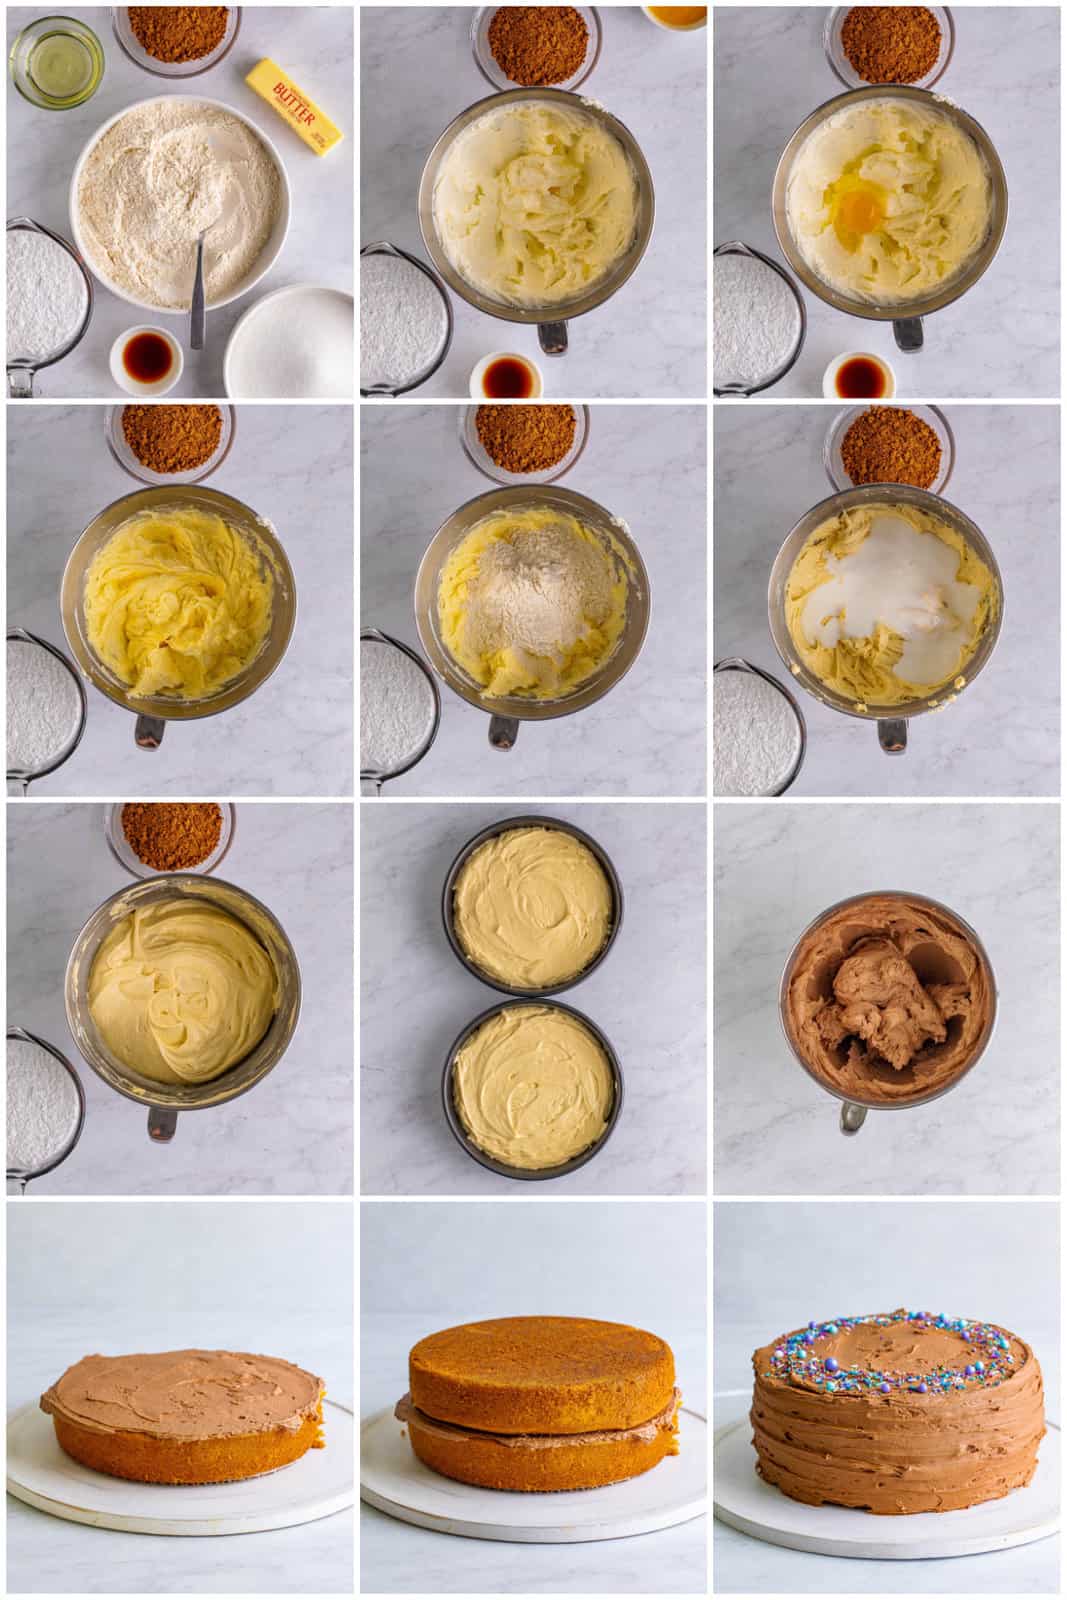 Step by step photos on how to make a Yellow Cake.